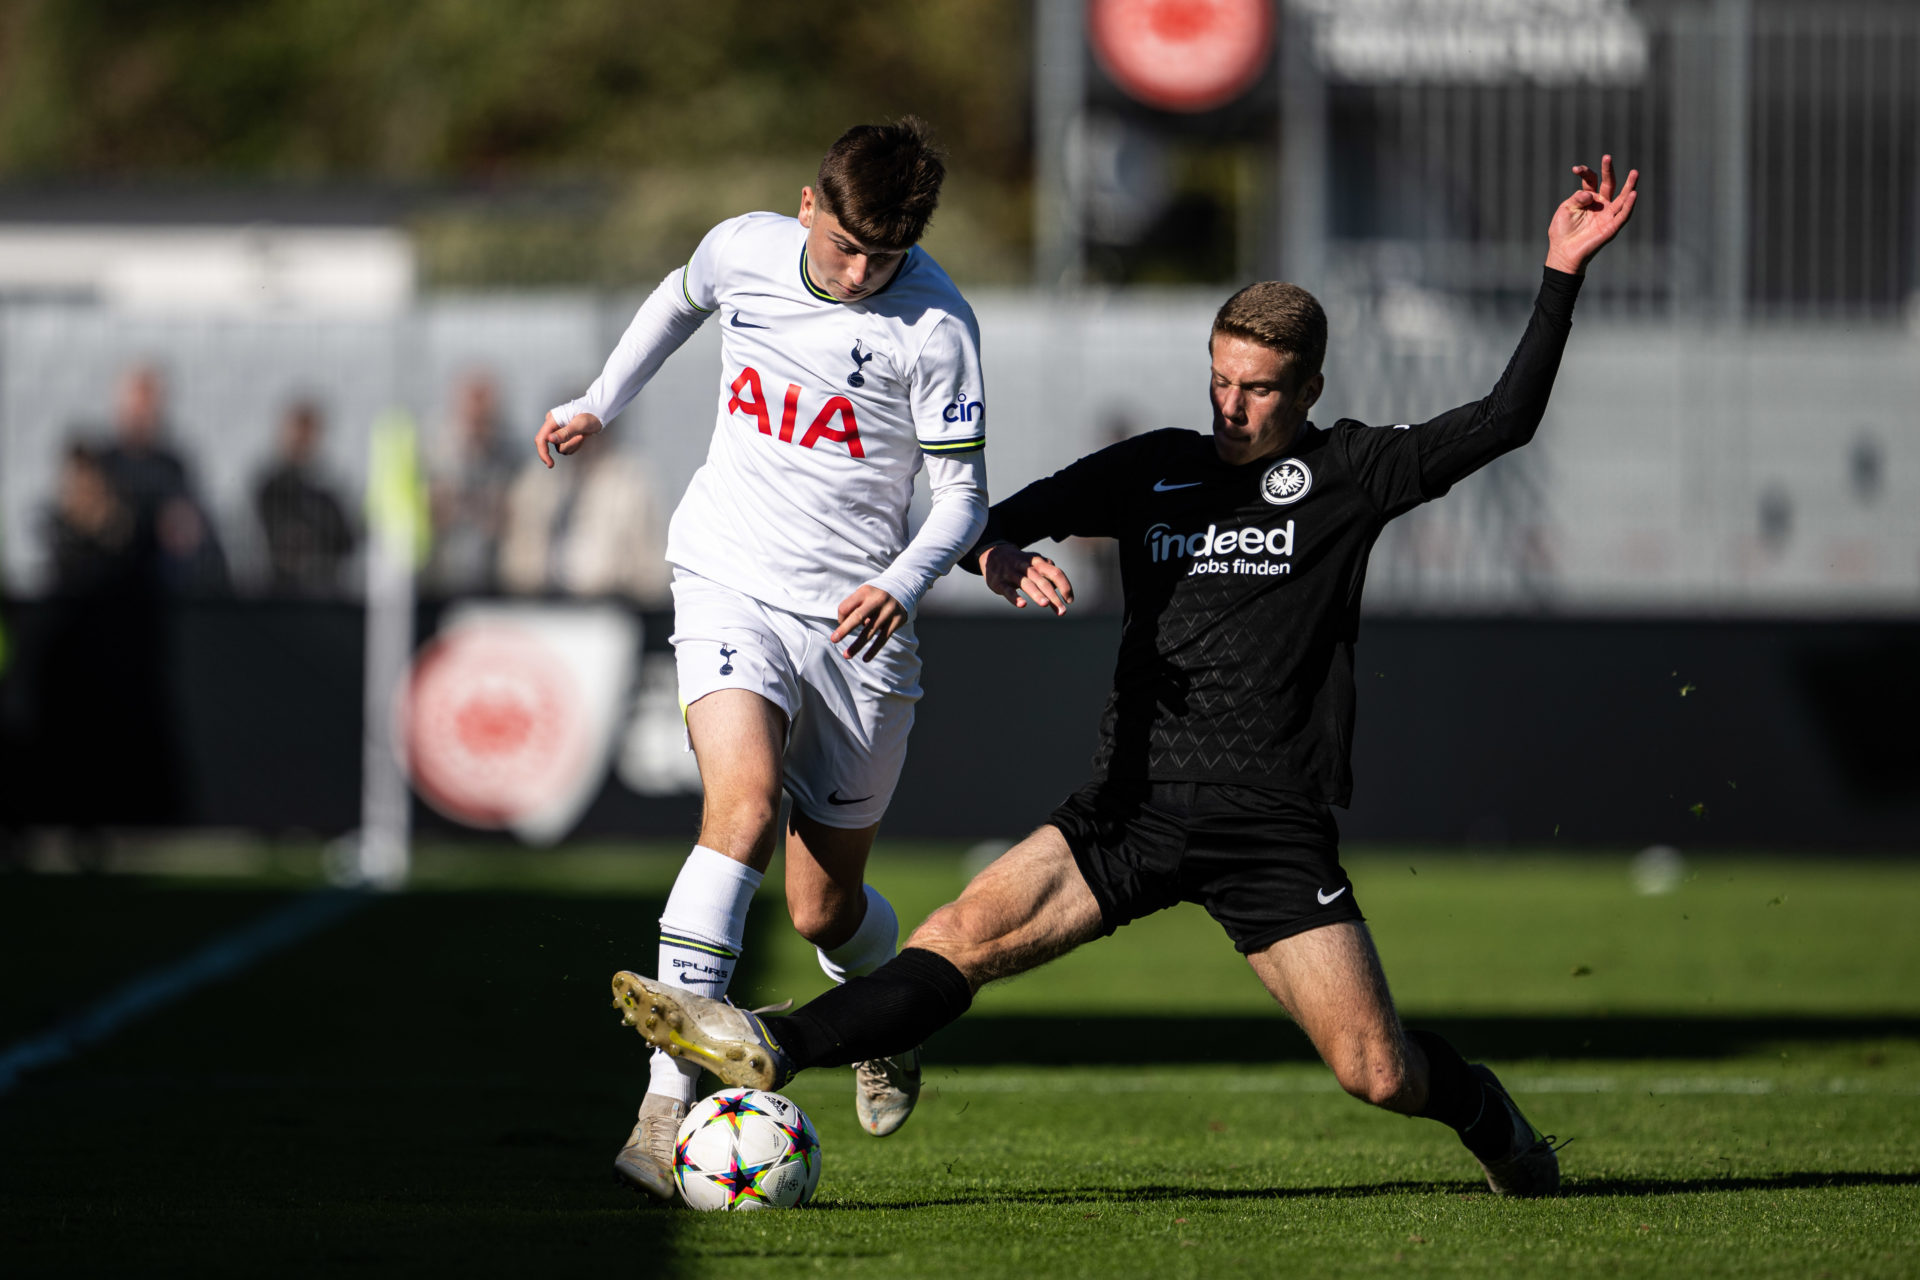 Mikey Moore (L) of Tottenham challenges for the ball with Elisa Niklas Baum of Frankfurt during the UEFA Youth League match. (Photo by Tottenham Hotspur FC/Tottenham Hotspur FC via Getty Images)